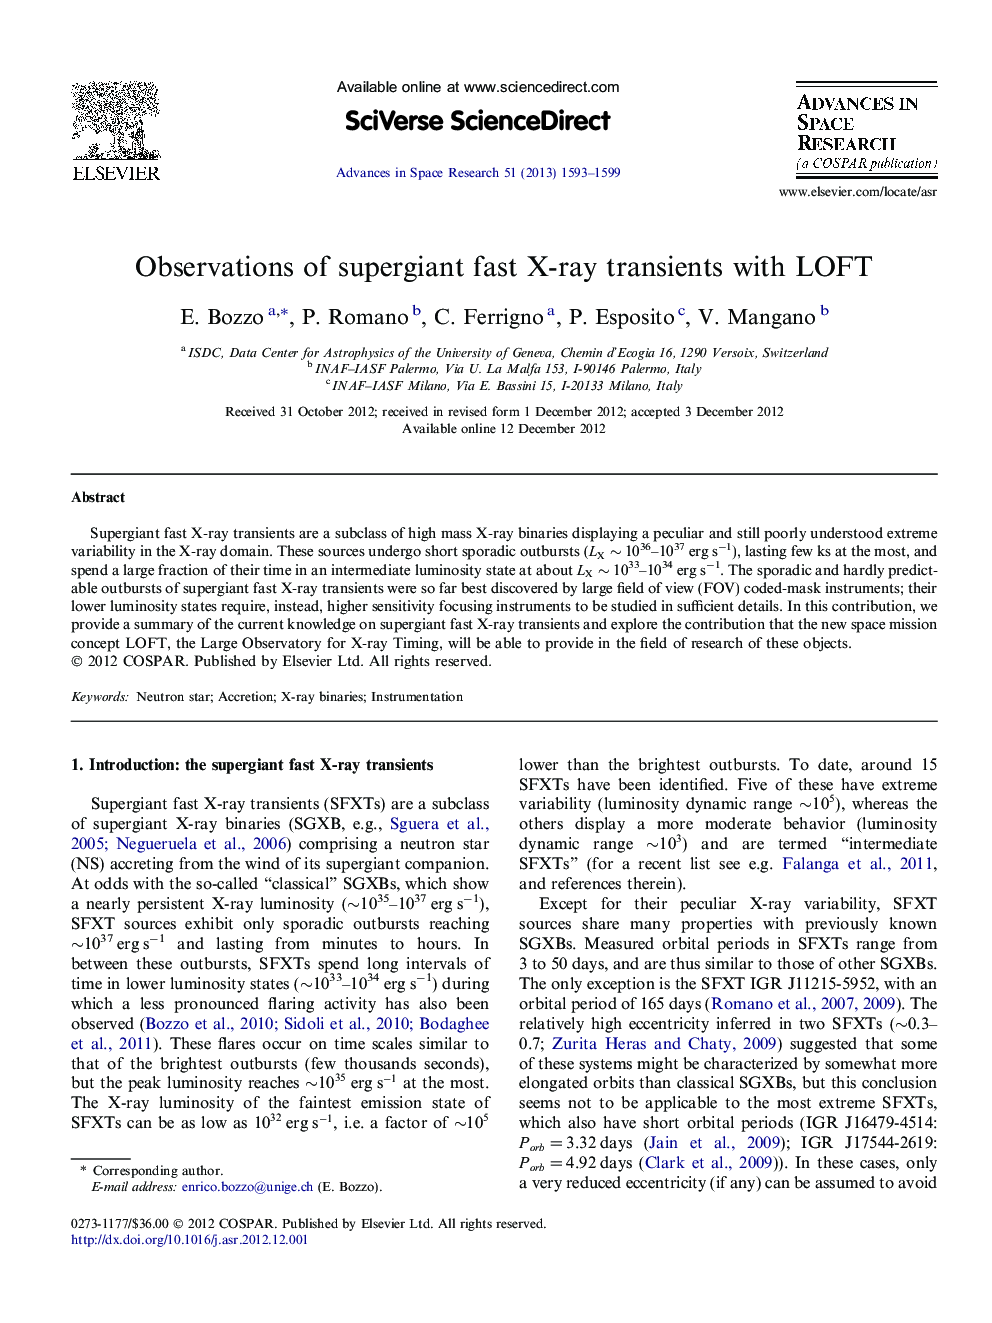 Observations of supergiant fast X-ray transients with LOFT